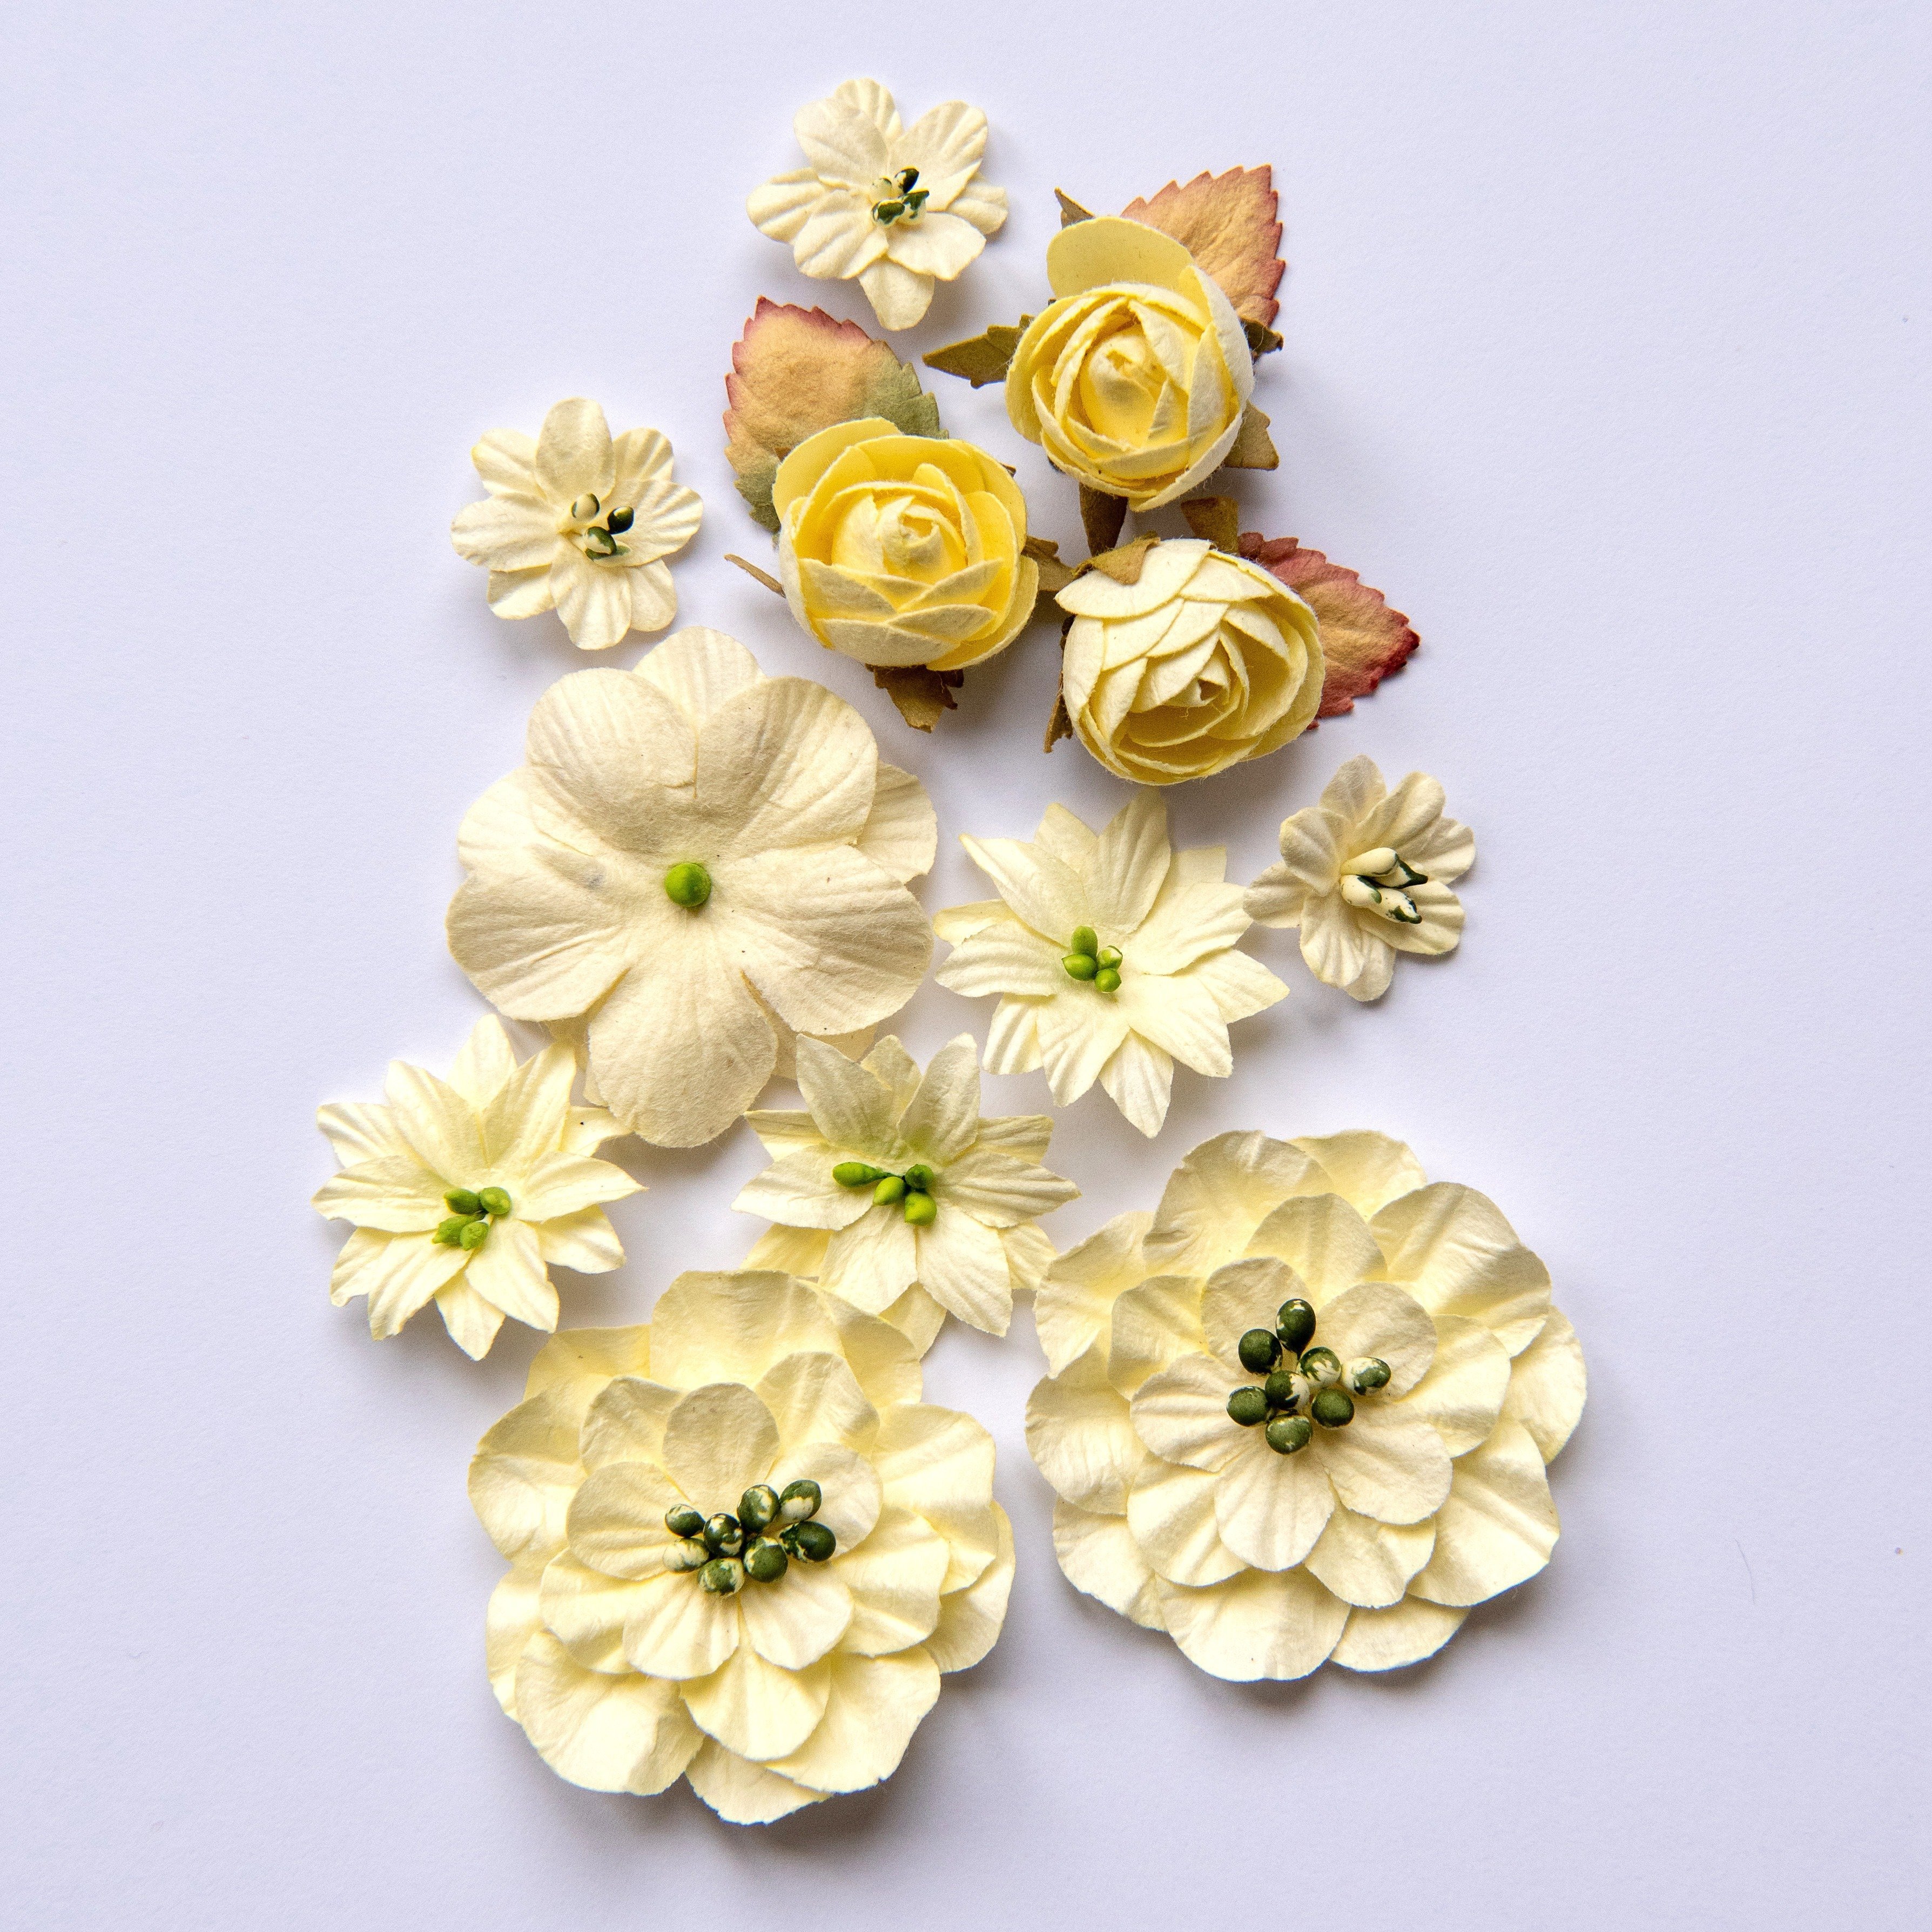 Country Blooms - Cream